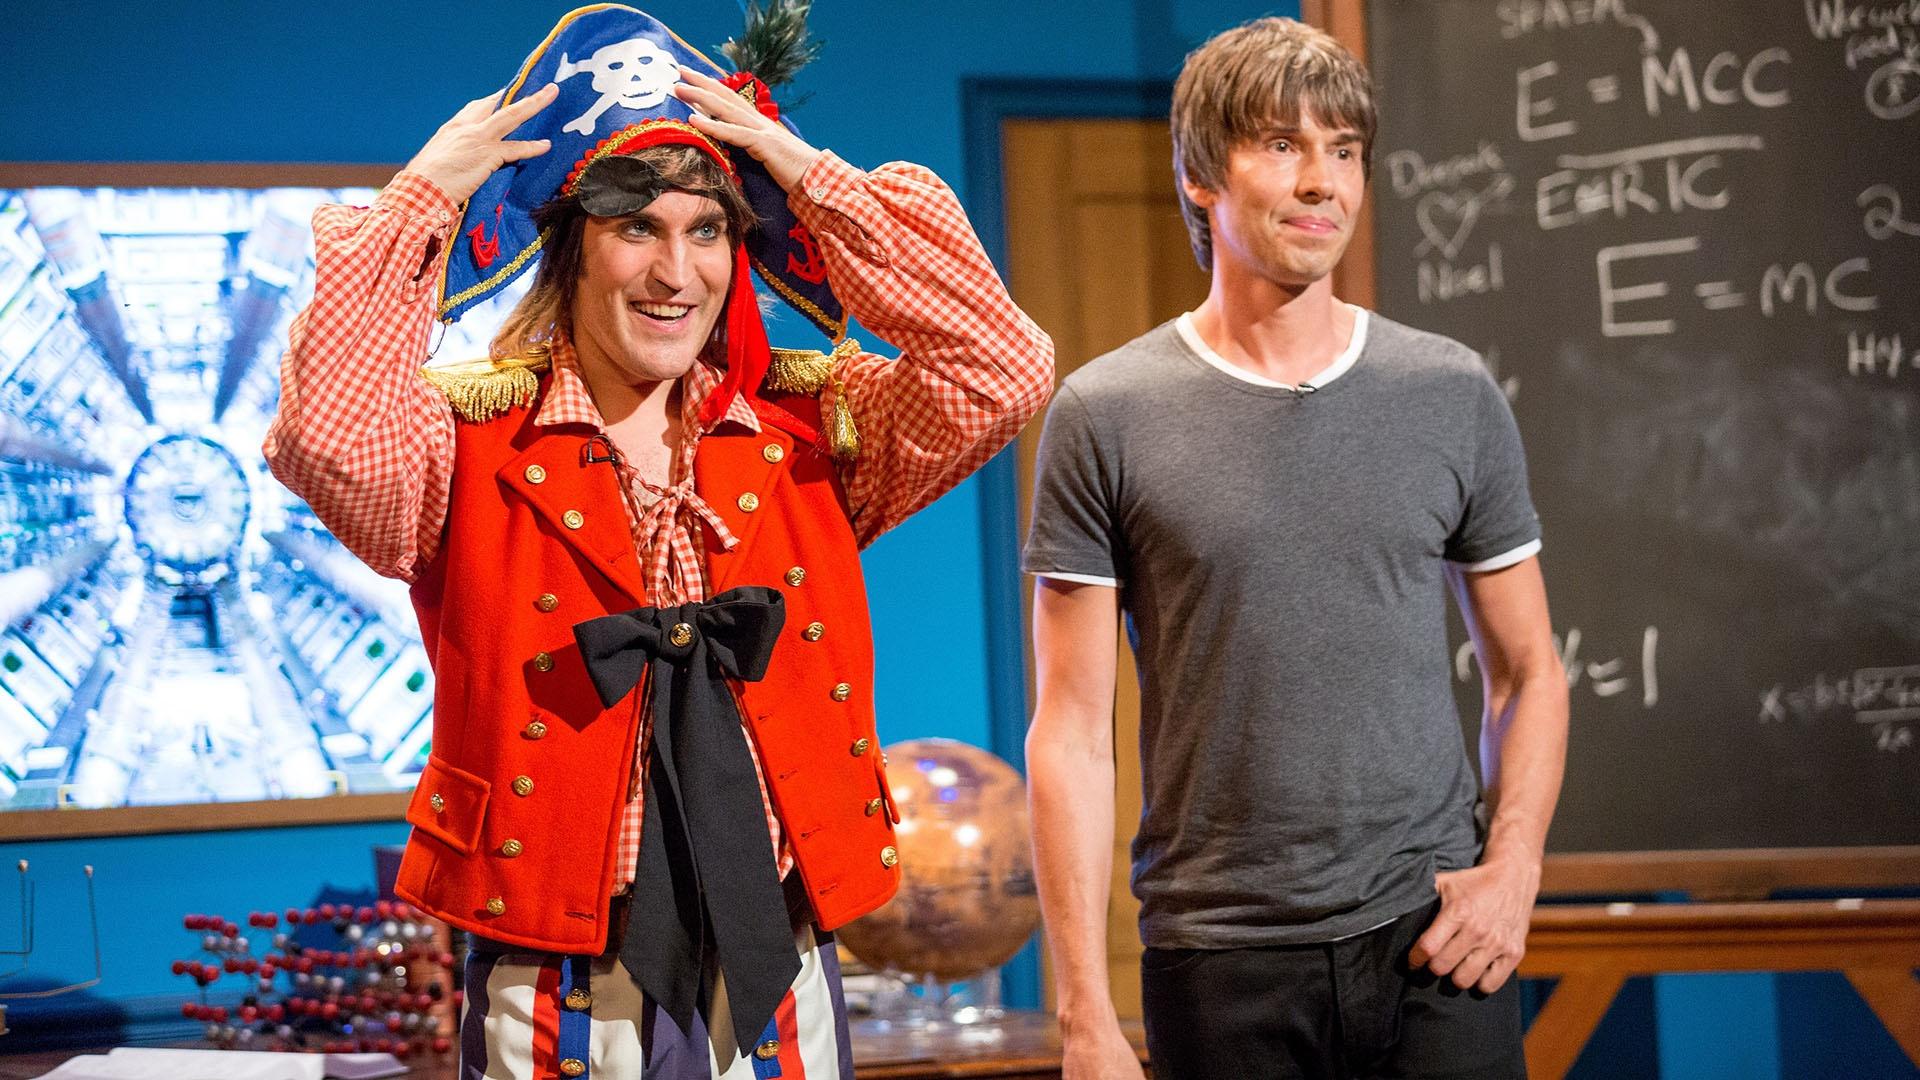 Brian Cox and Noel Fielding dressed as a pirate